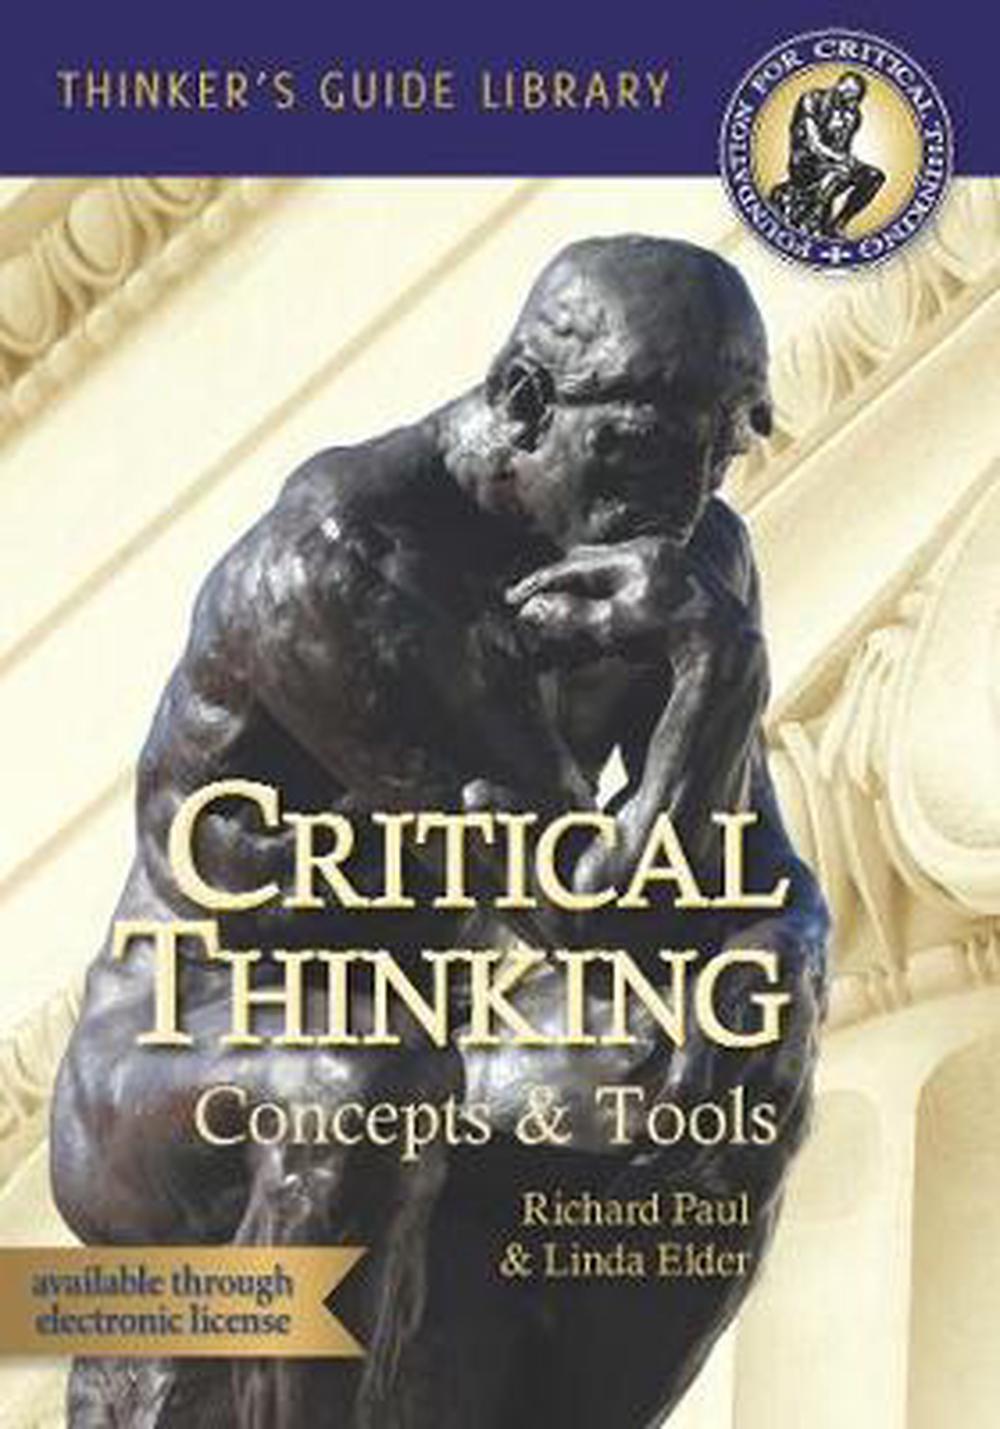 miniature guide to critical thinking